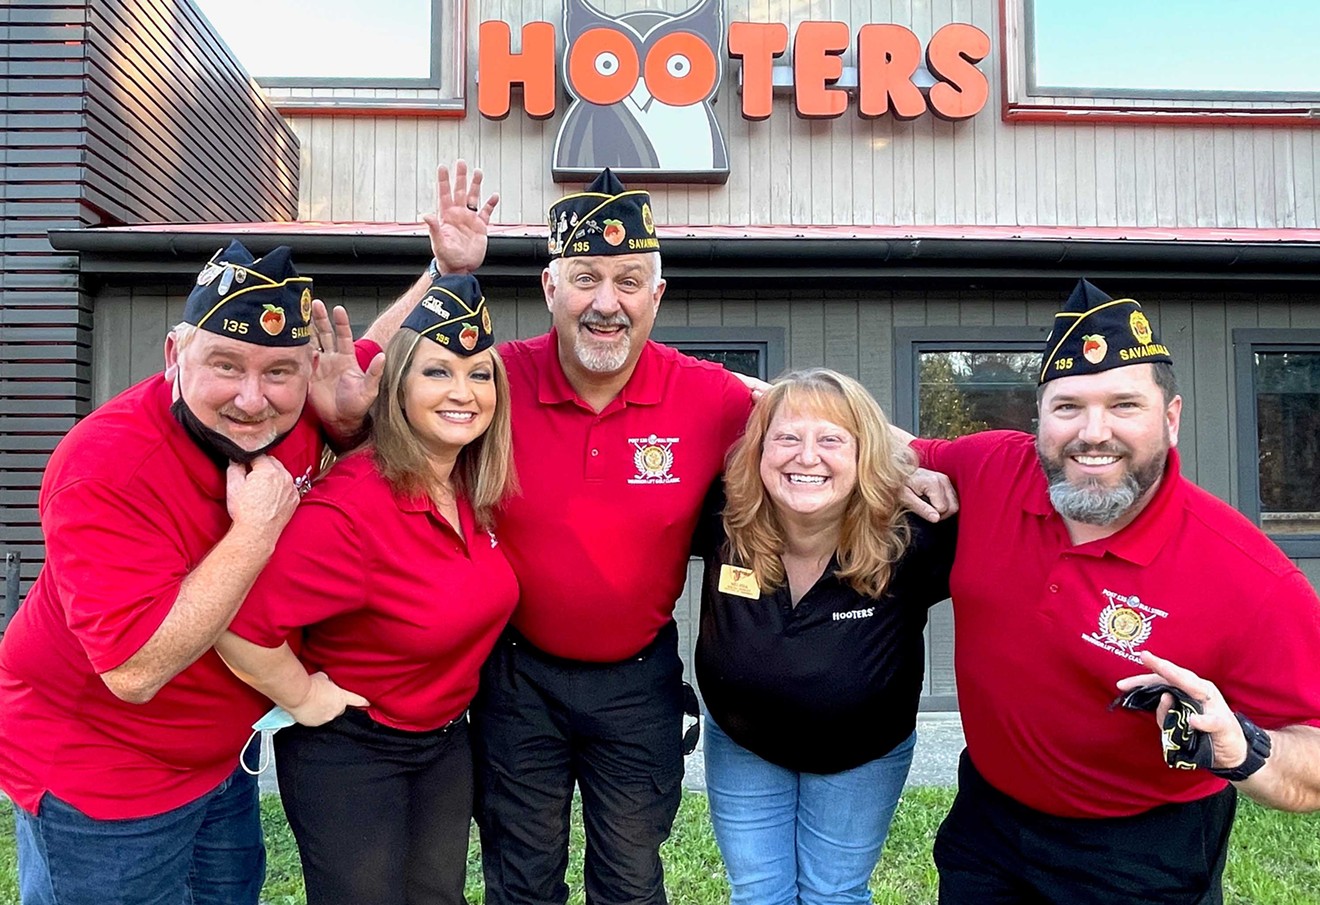 Members of the American Legion Post 135 celebrate Hooters’ sponsorship of this year’s event.